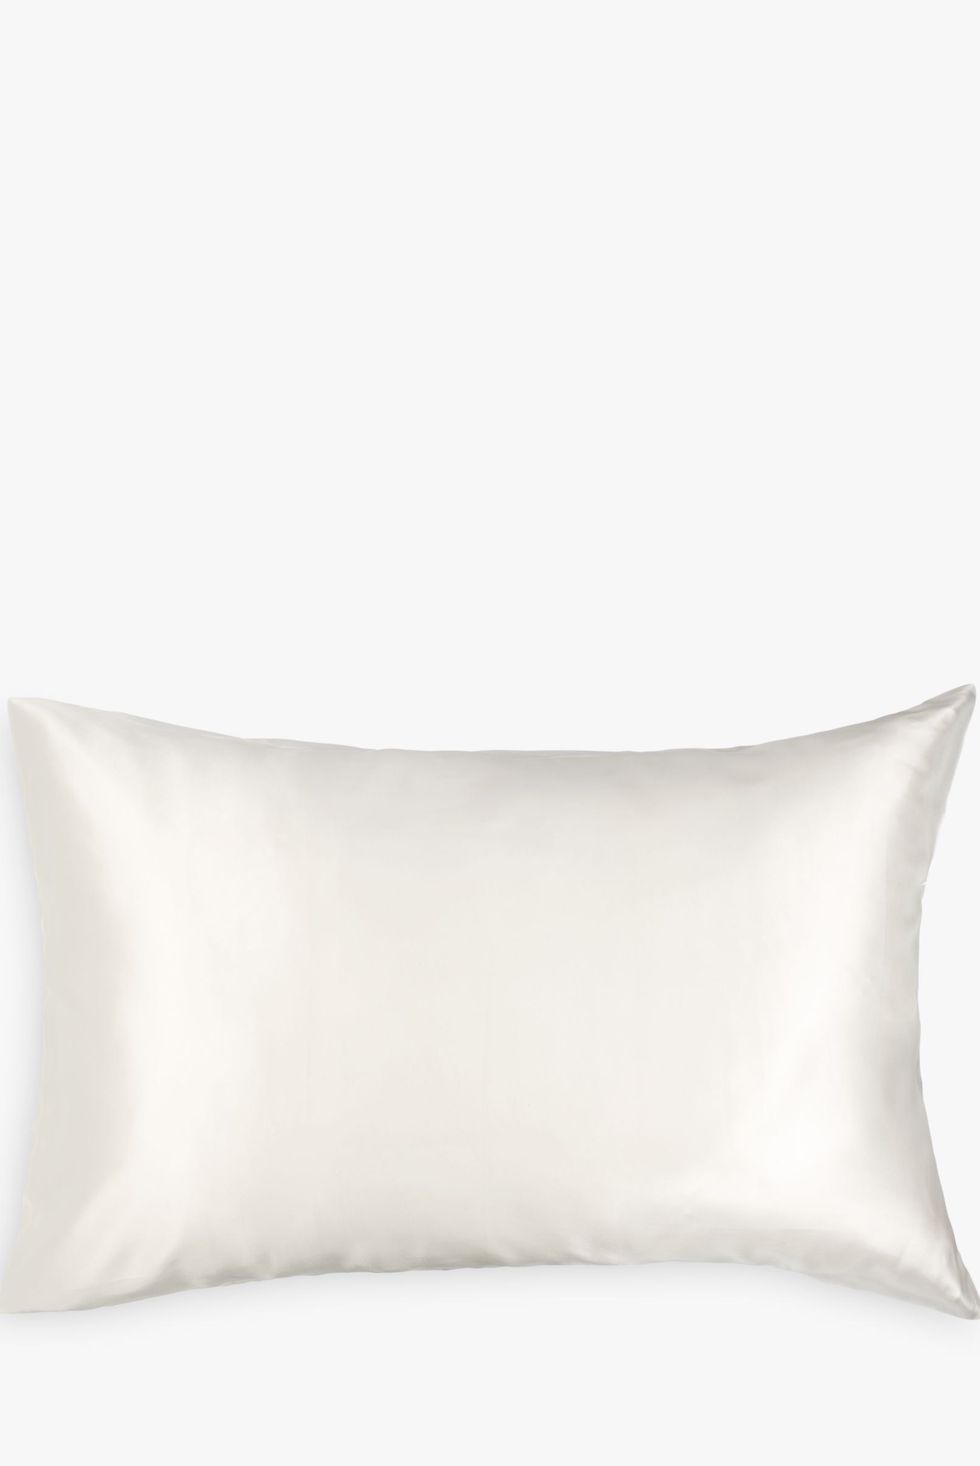 John Lewis & Partners The Ultimate Collection Silk Standard Pillowcase, Pearl grey